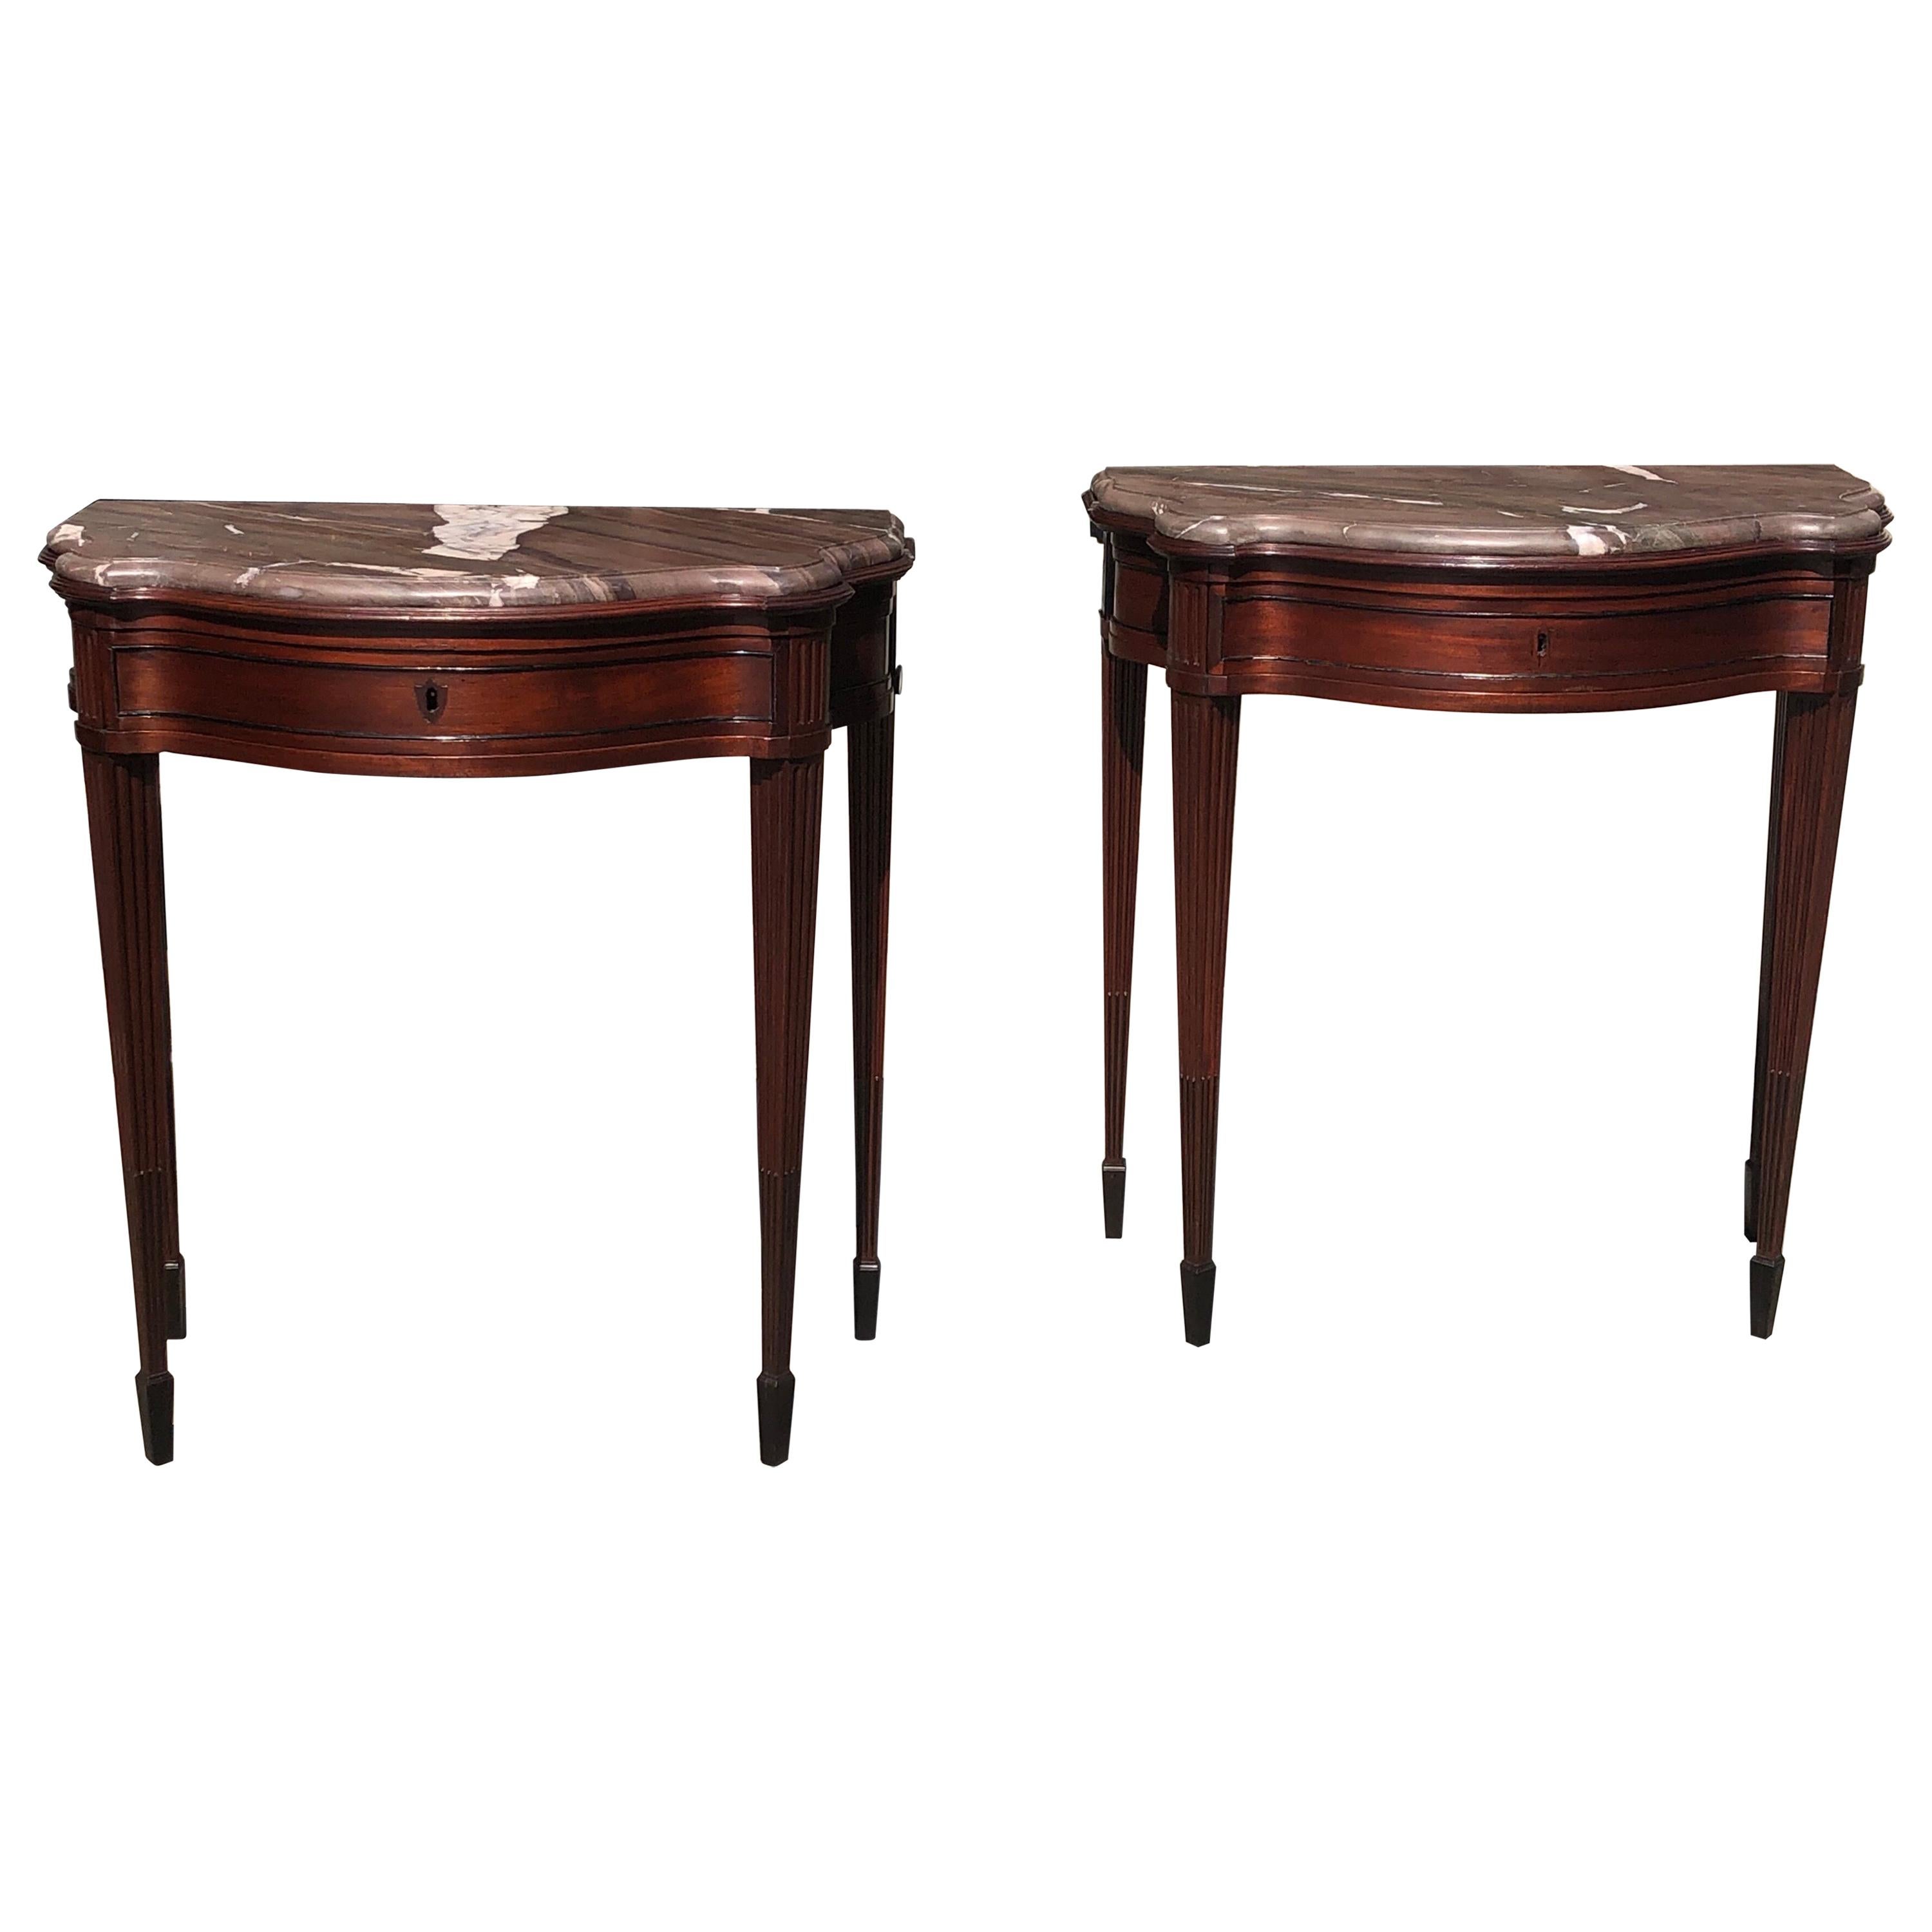 Pair of Late 18th Century Mahogany and Marble English Console Tables For Sale